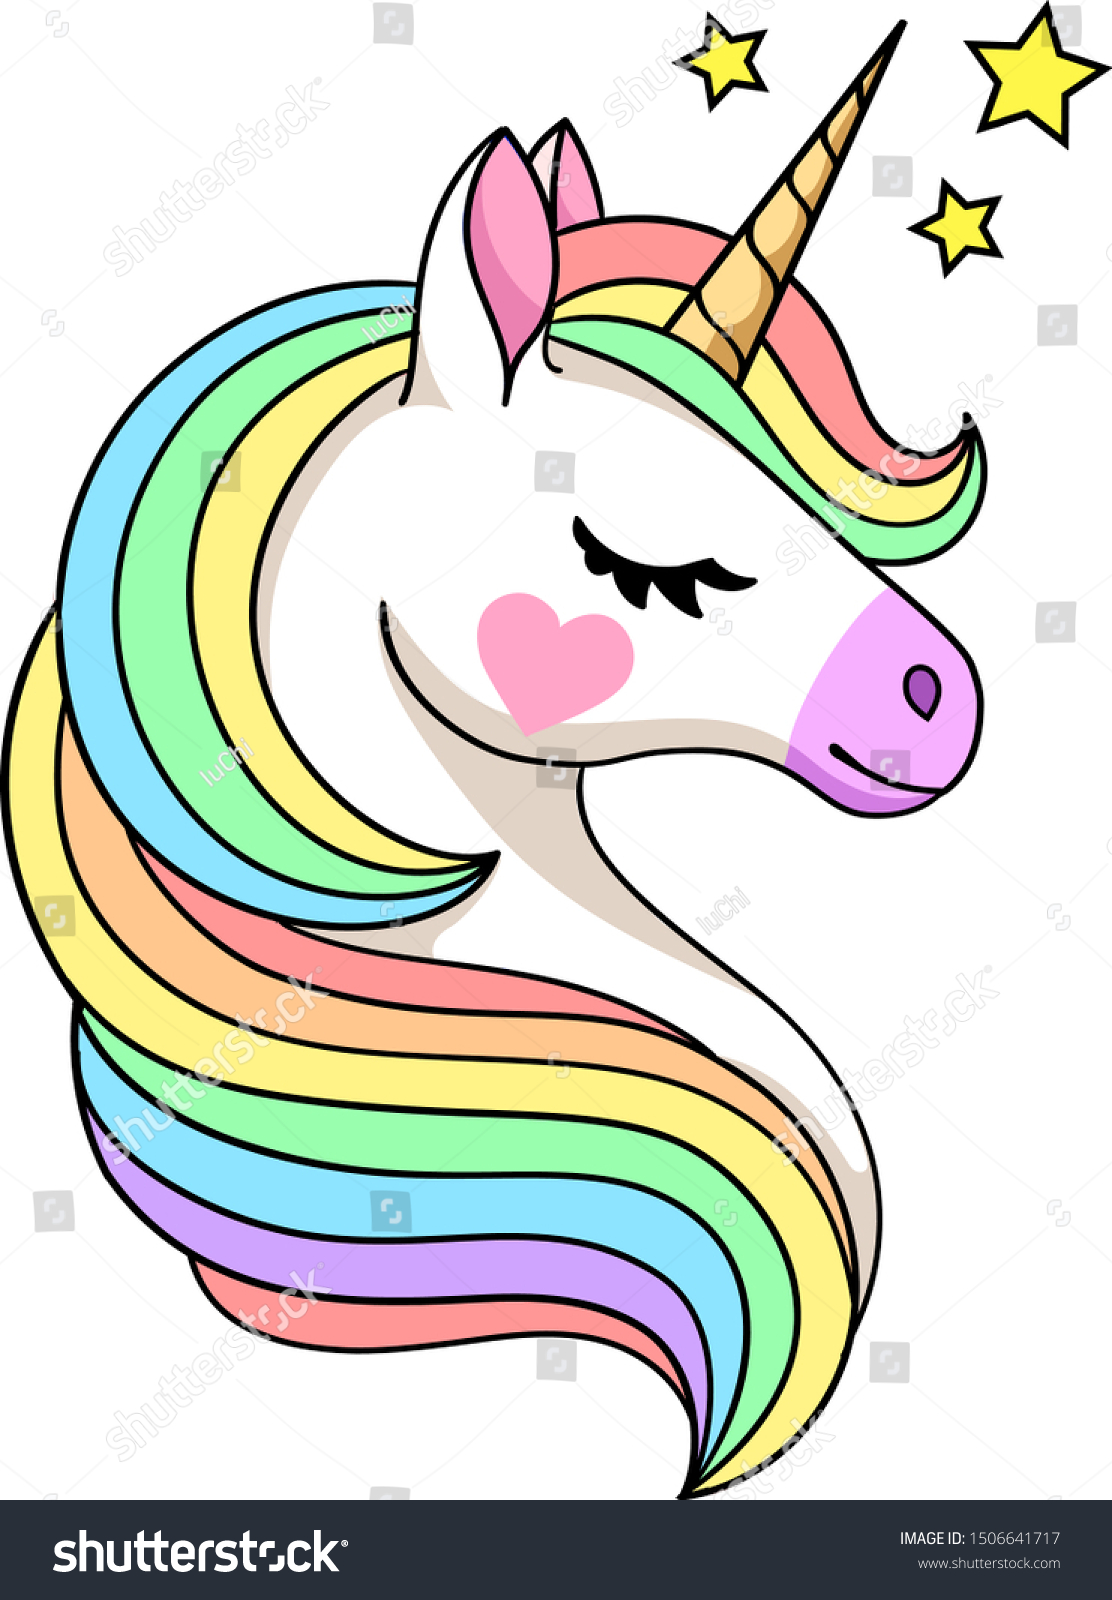 Featured image of post Show Me Pictures Of Cute Unicorns Maybe more than others